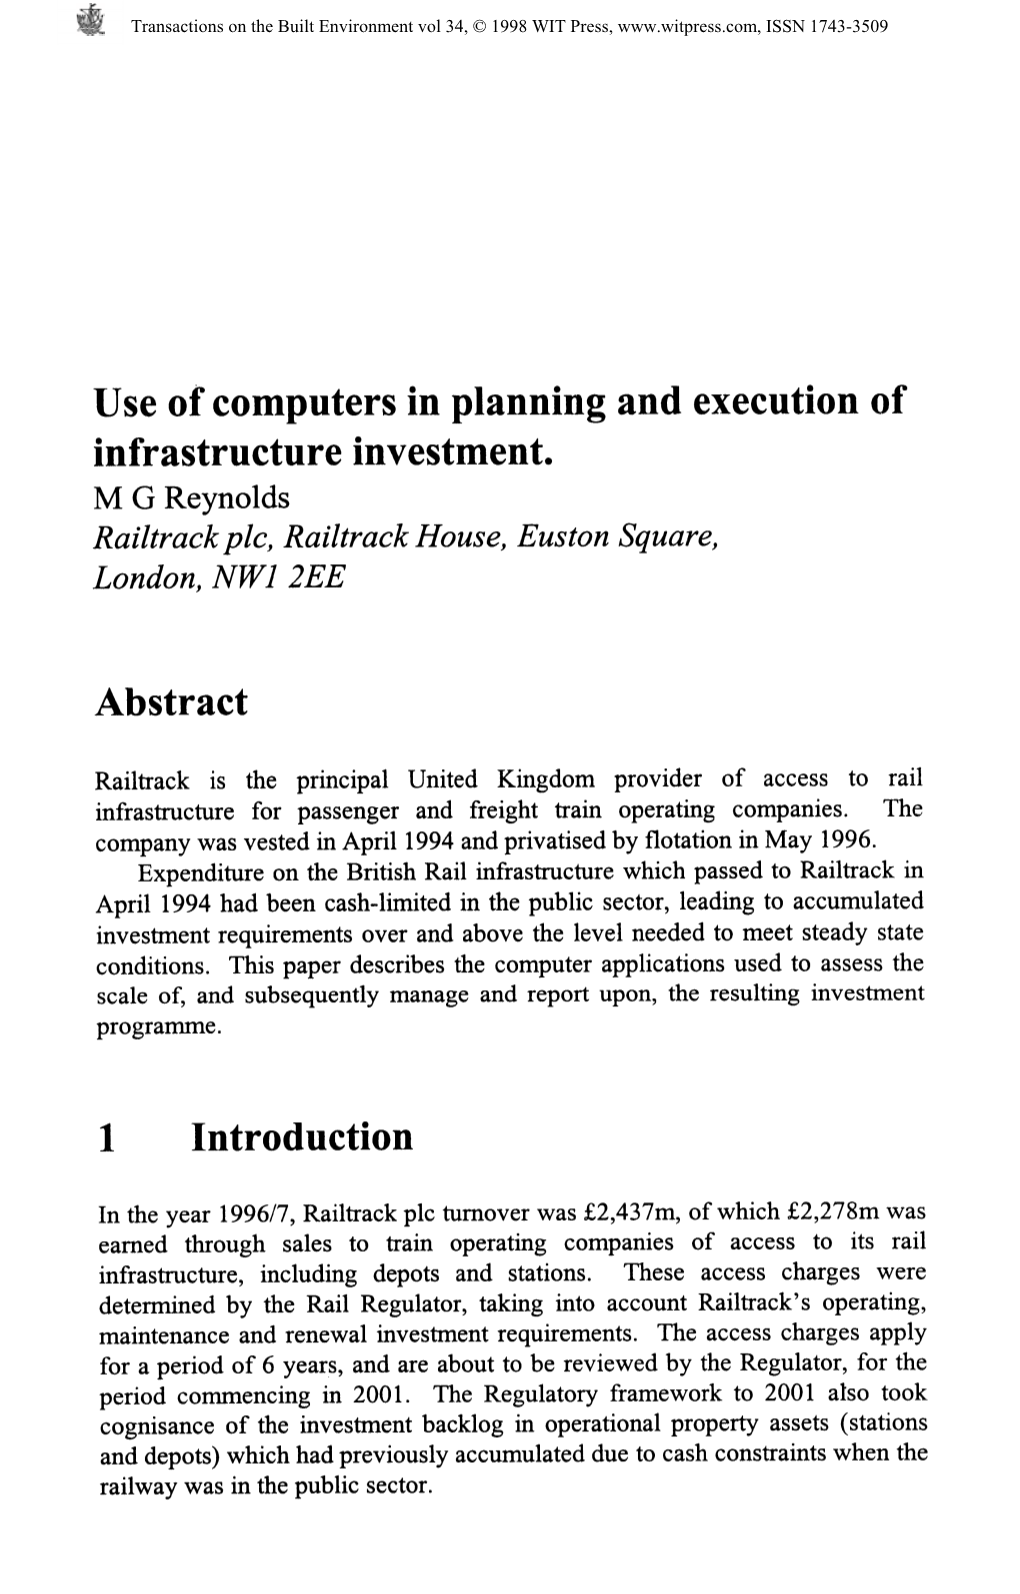 Use of Computers in Planning and Execution of Infrastructure Investment